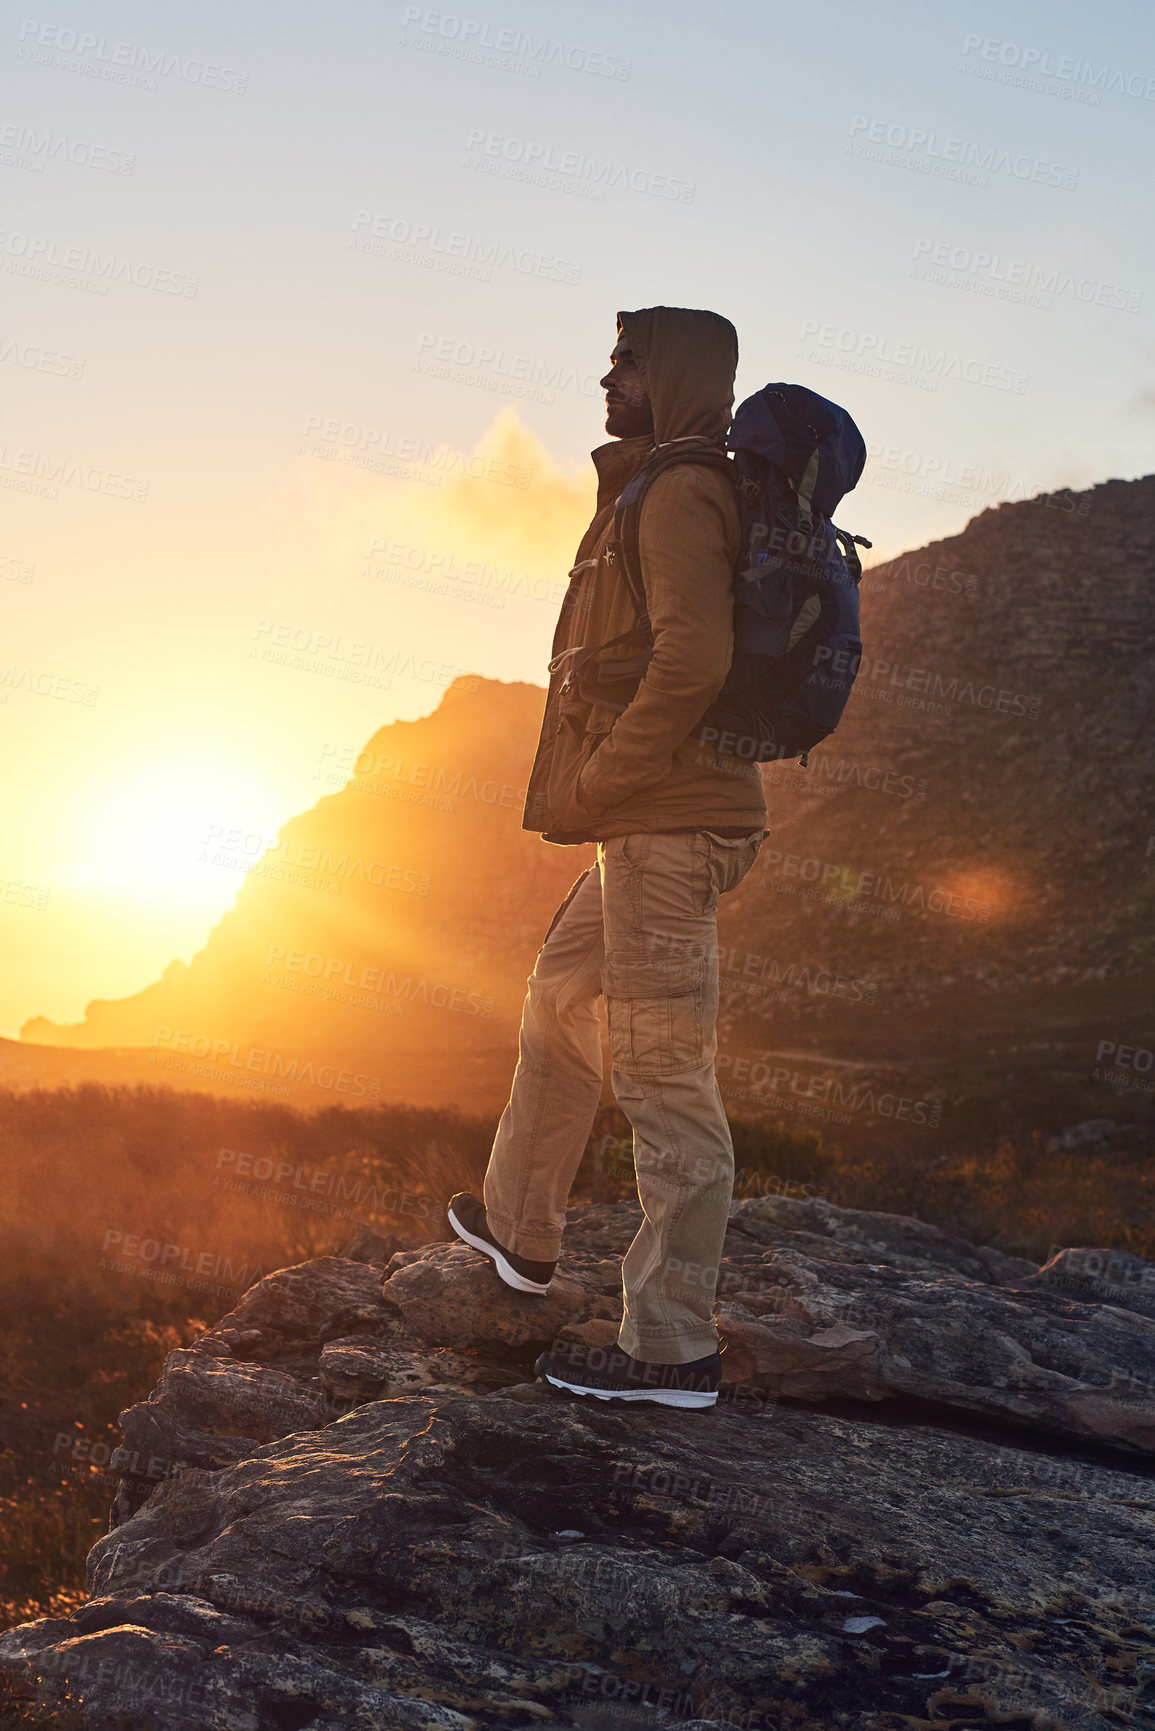 Buy stock photo Shot of a hiker on top of a mountain taking in the views of the morning sun